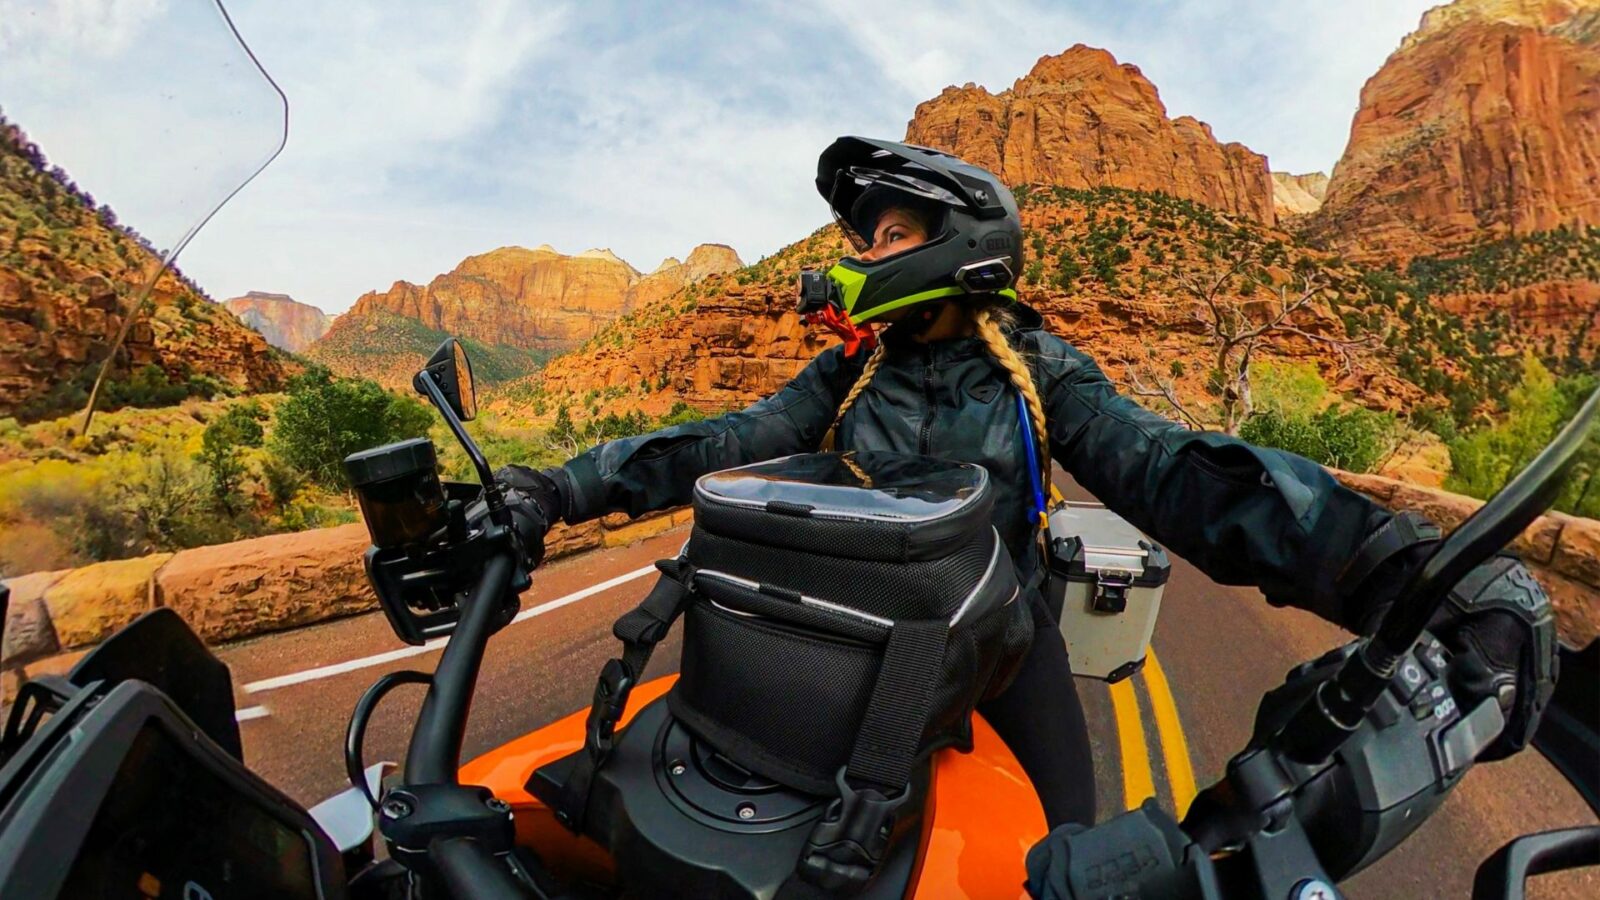 Mount Action Camera on Motorcycle